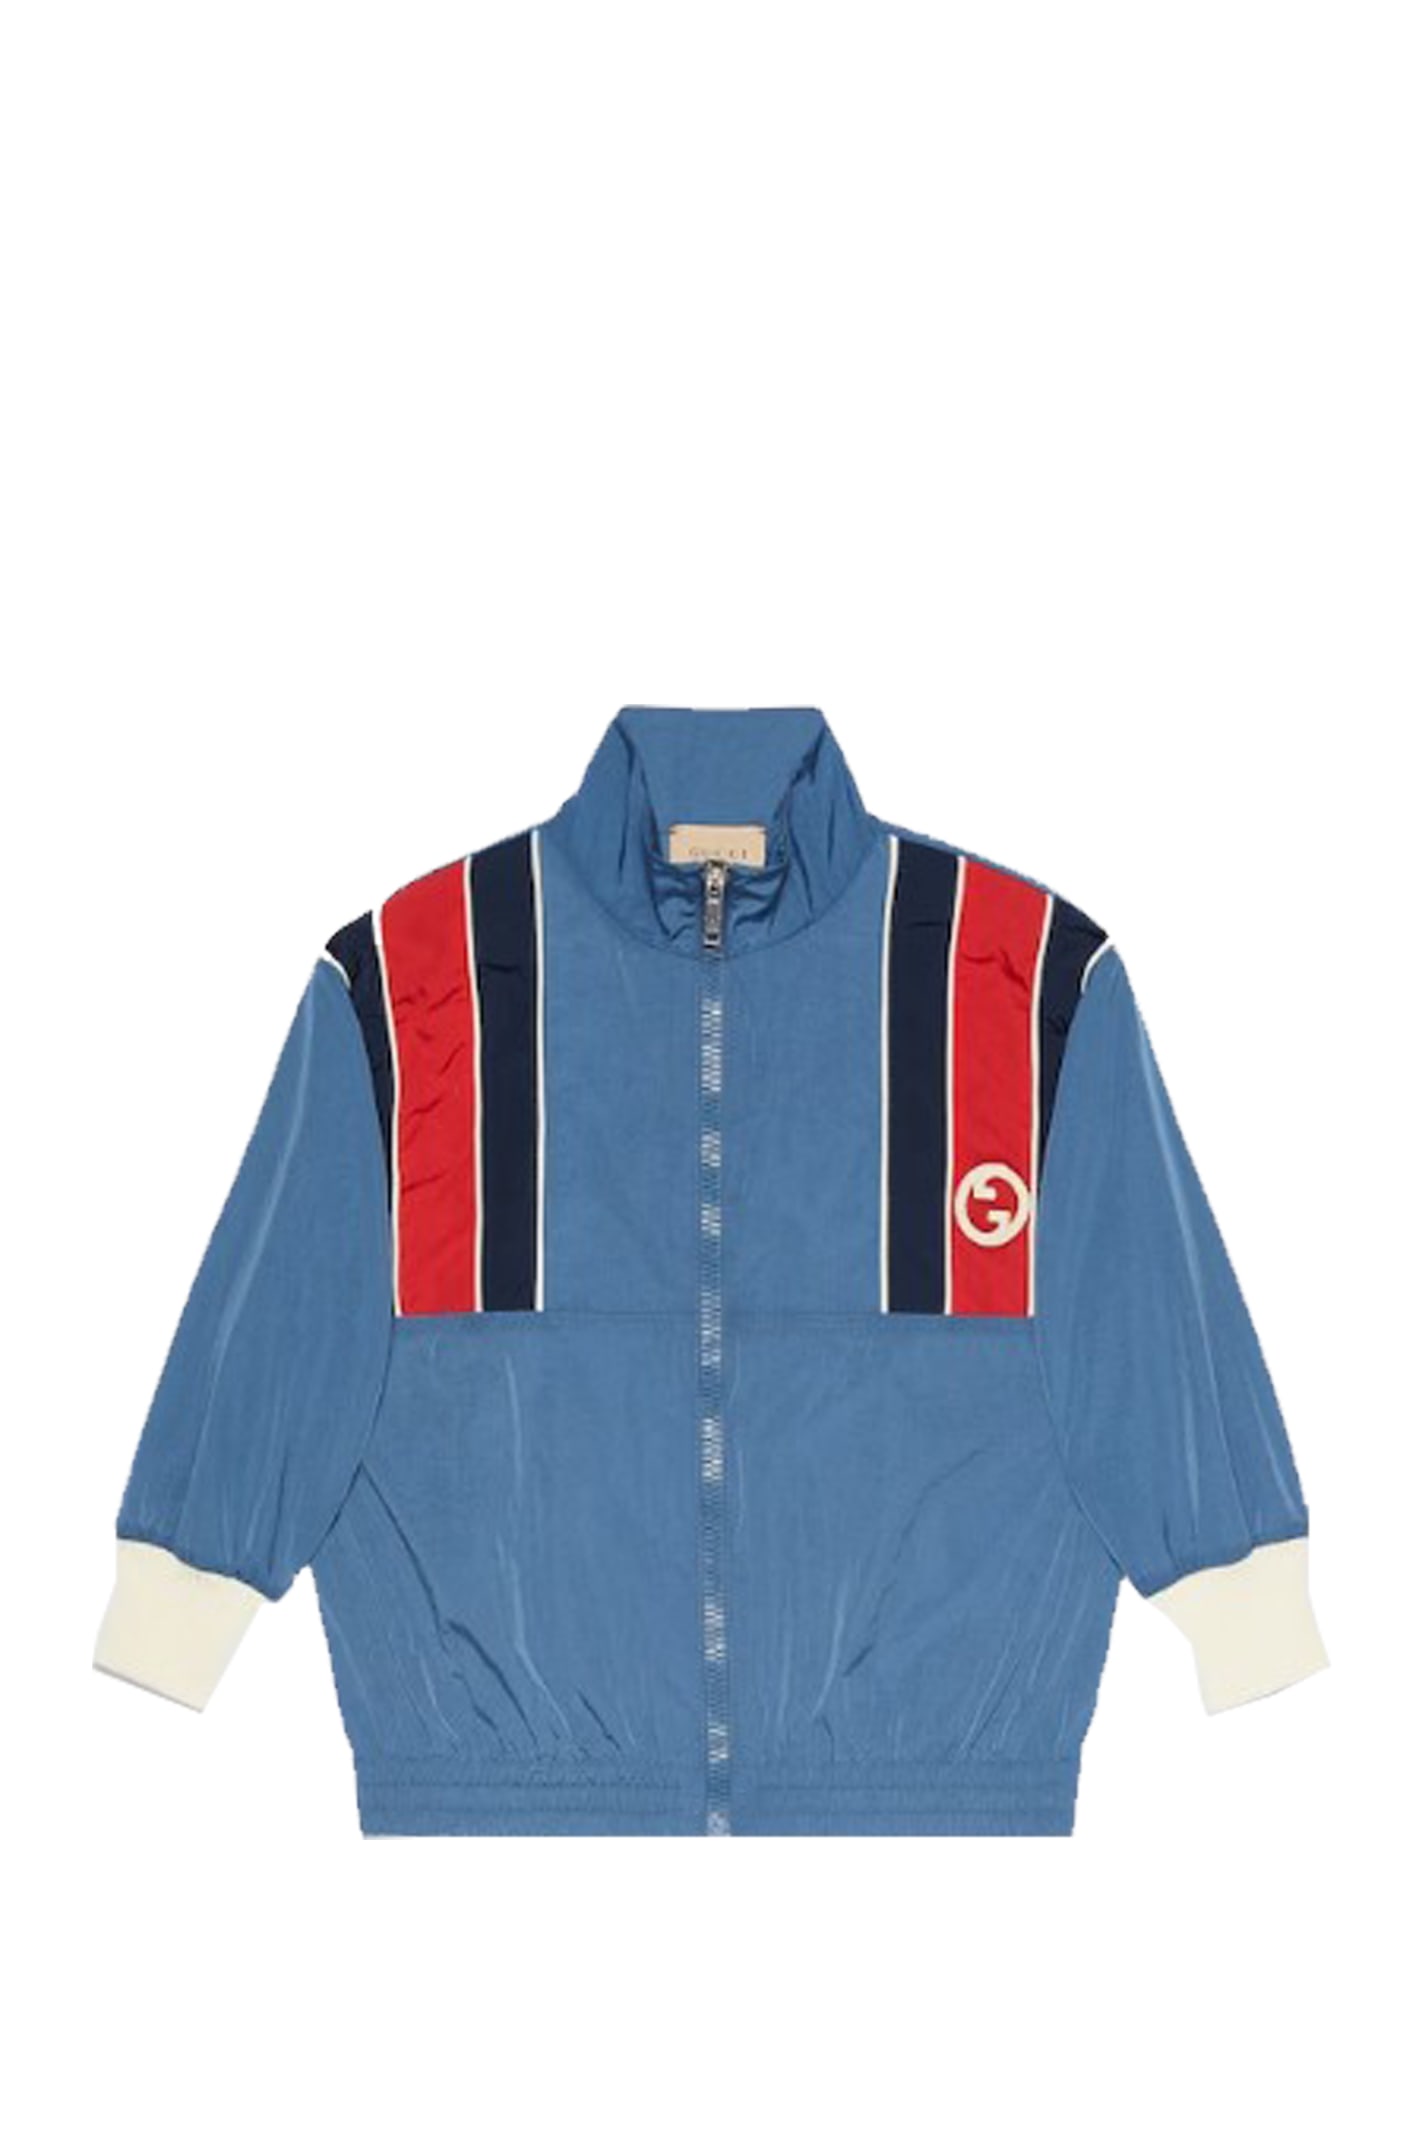 GUCCI CHILDS NYLON JACKET WITH ZIP